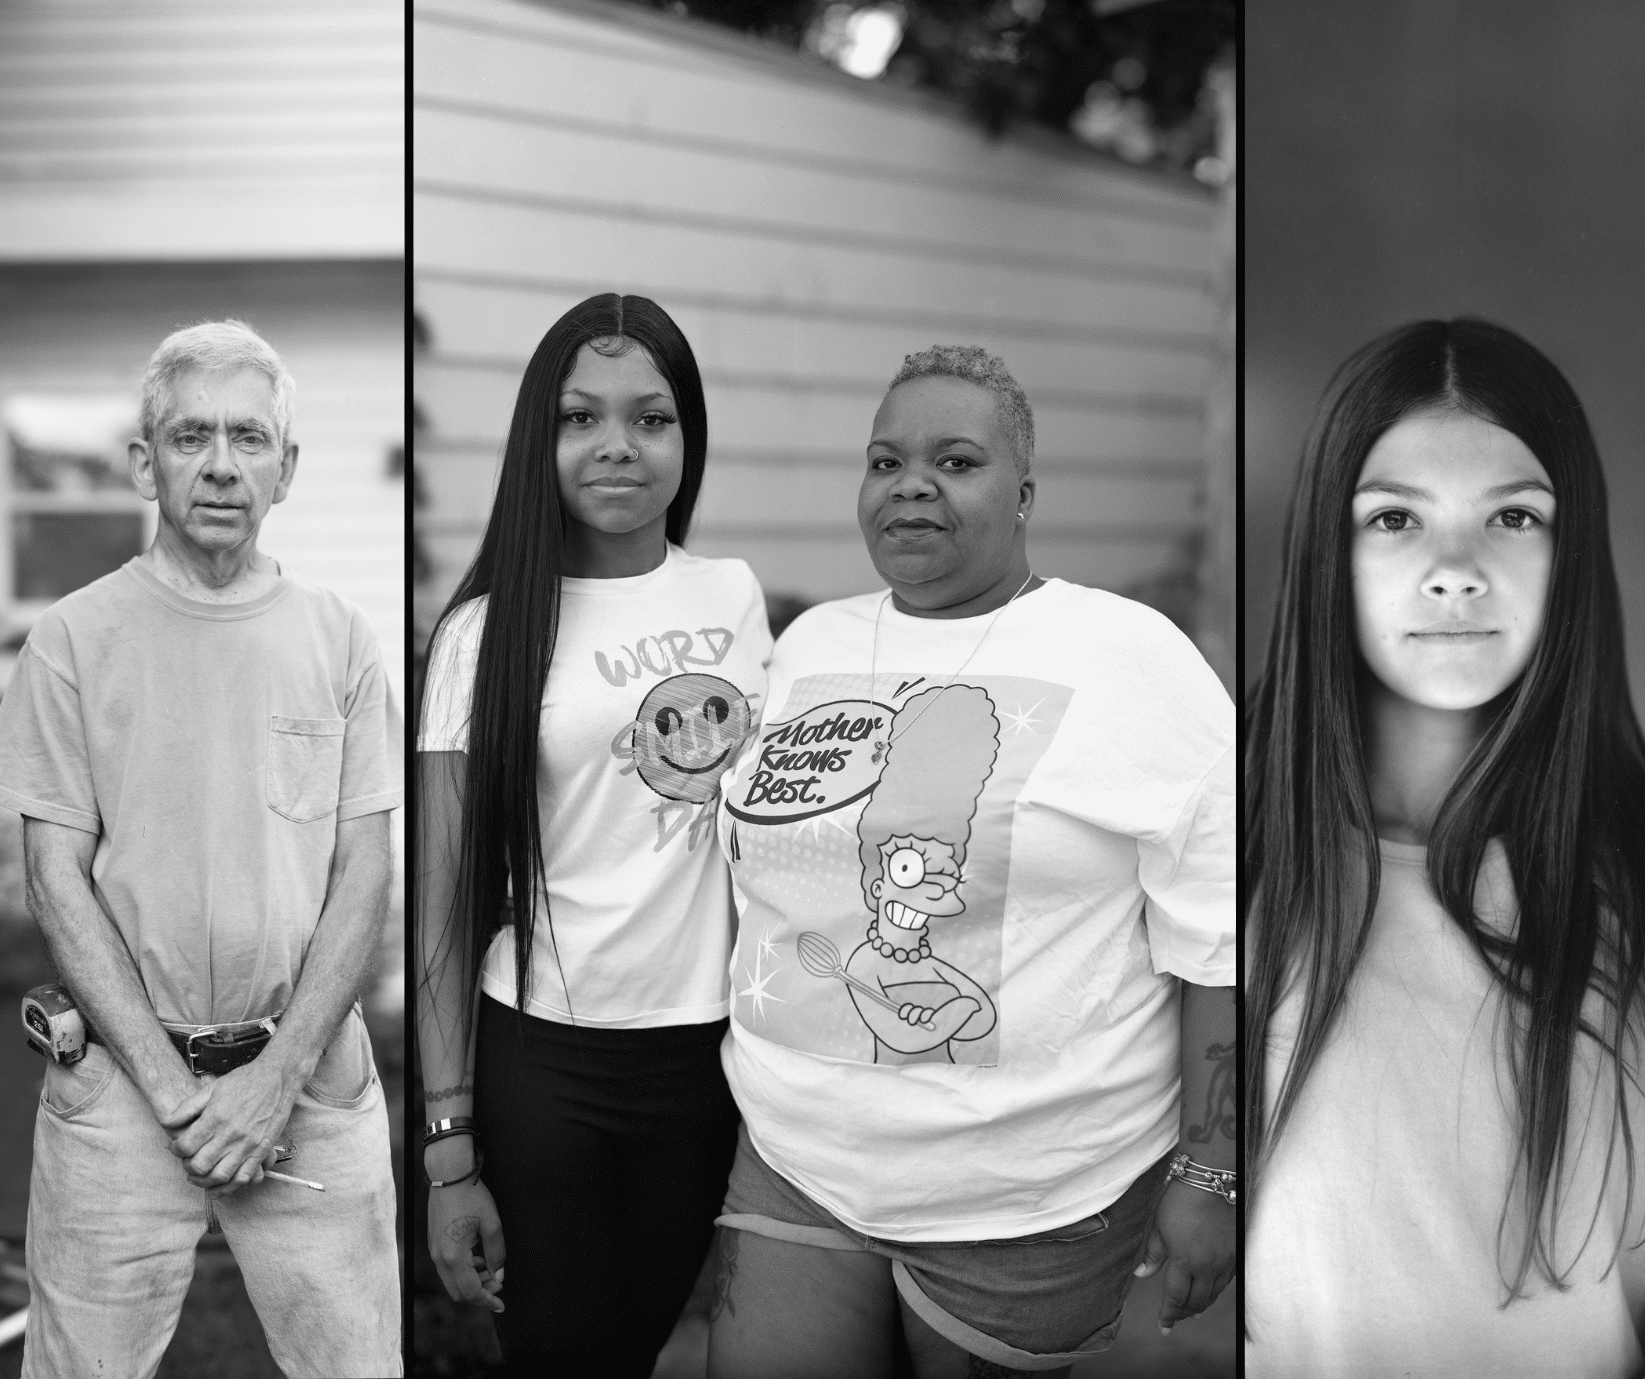 black and white photos of diverse people from different rural and low-income areas of the USA